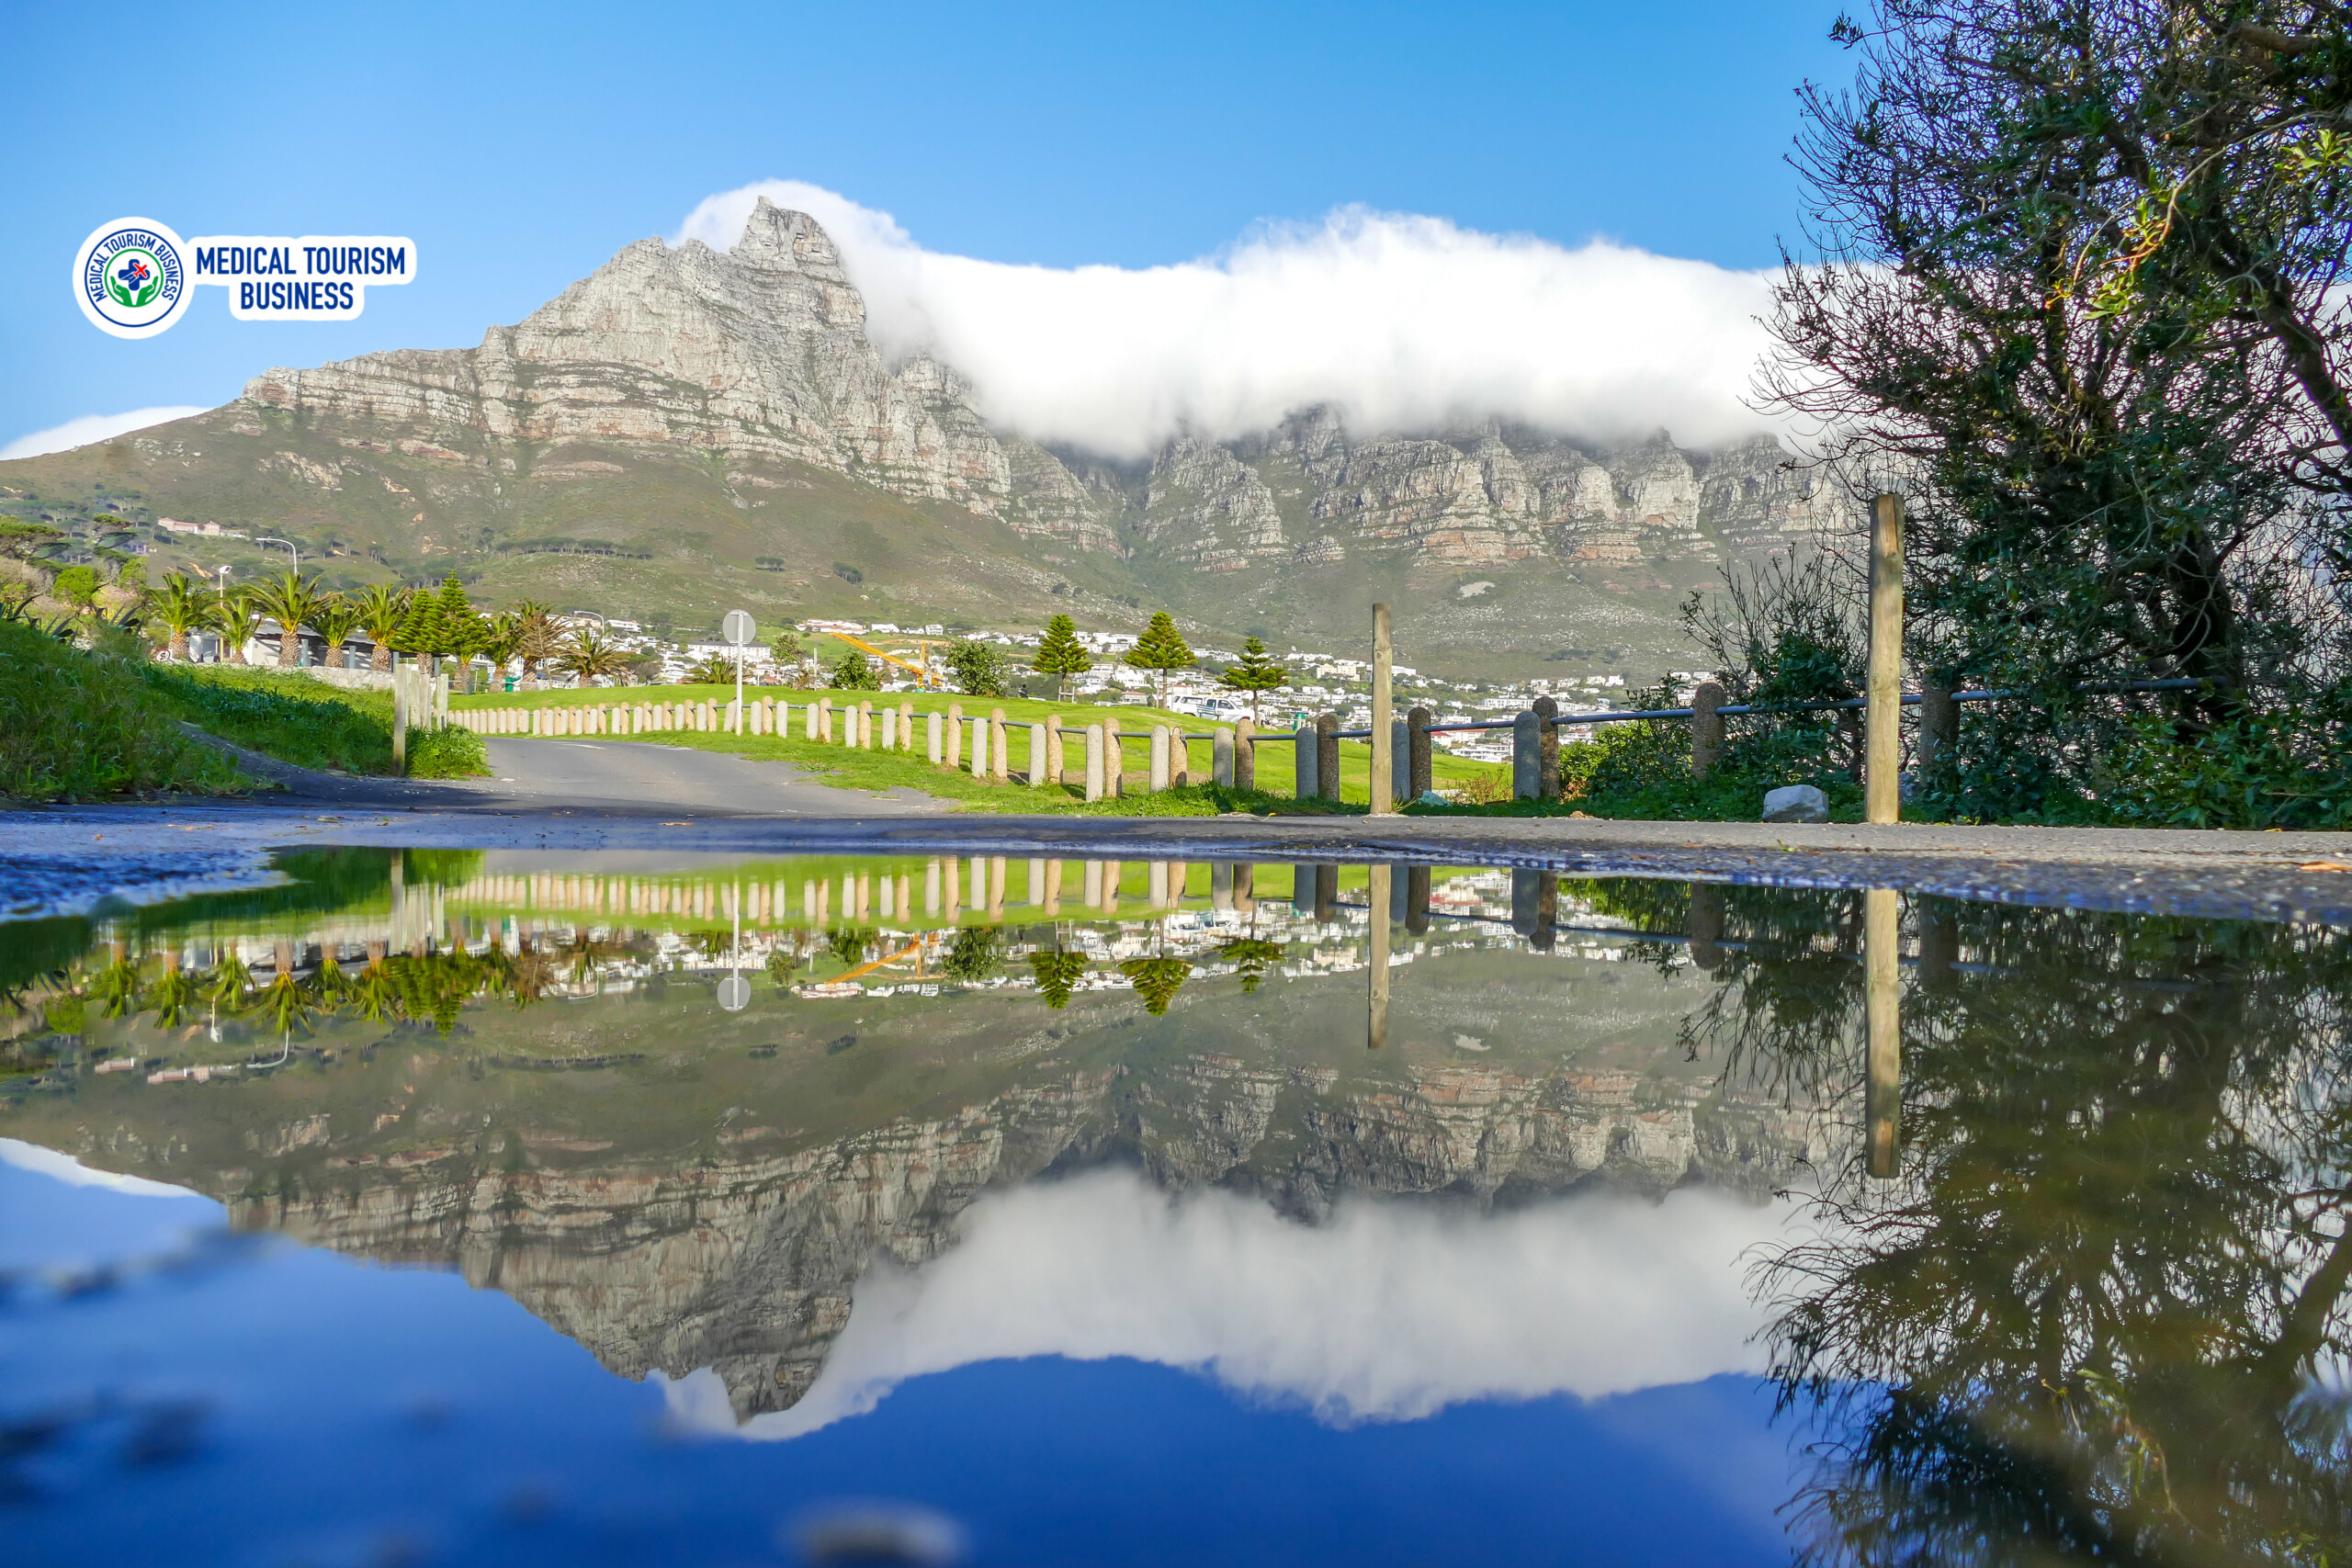 South Africa's Medical Tourism Market: Why It's Thriving